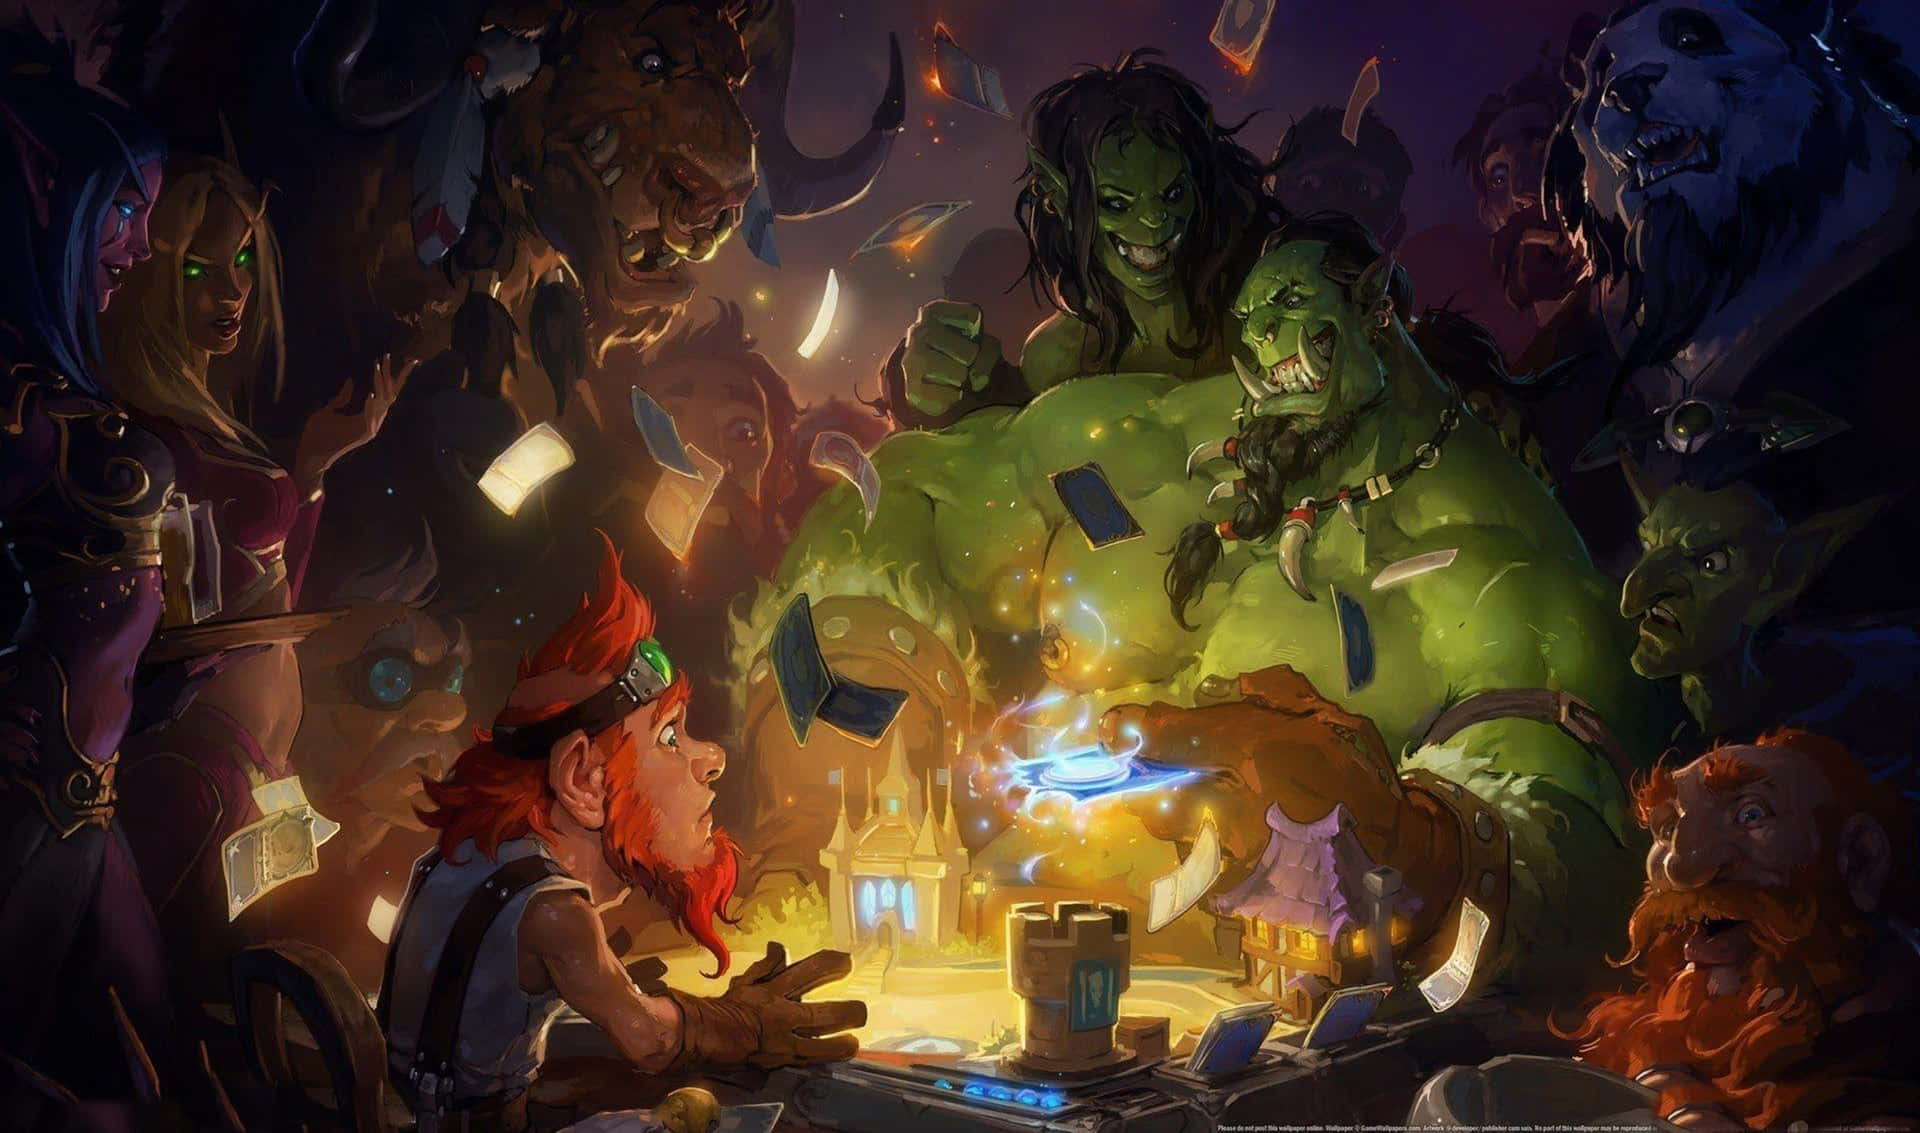 An Intense Duel Between Two Players in a Hearthstone Match